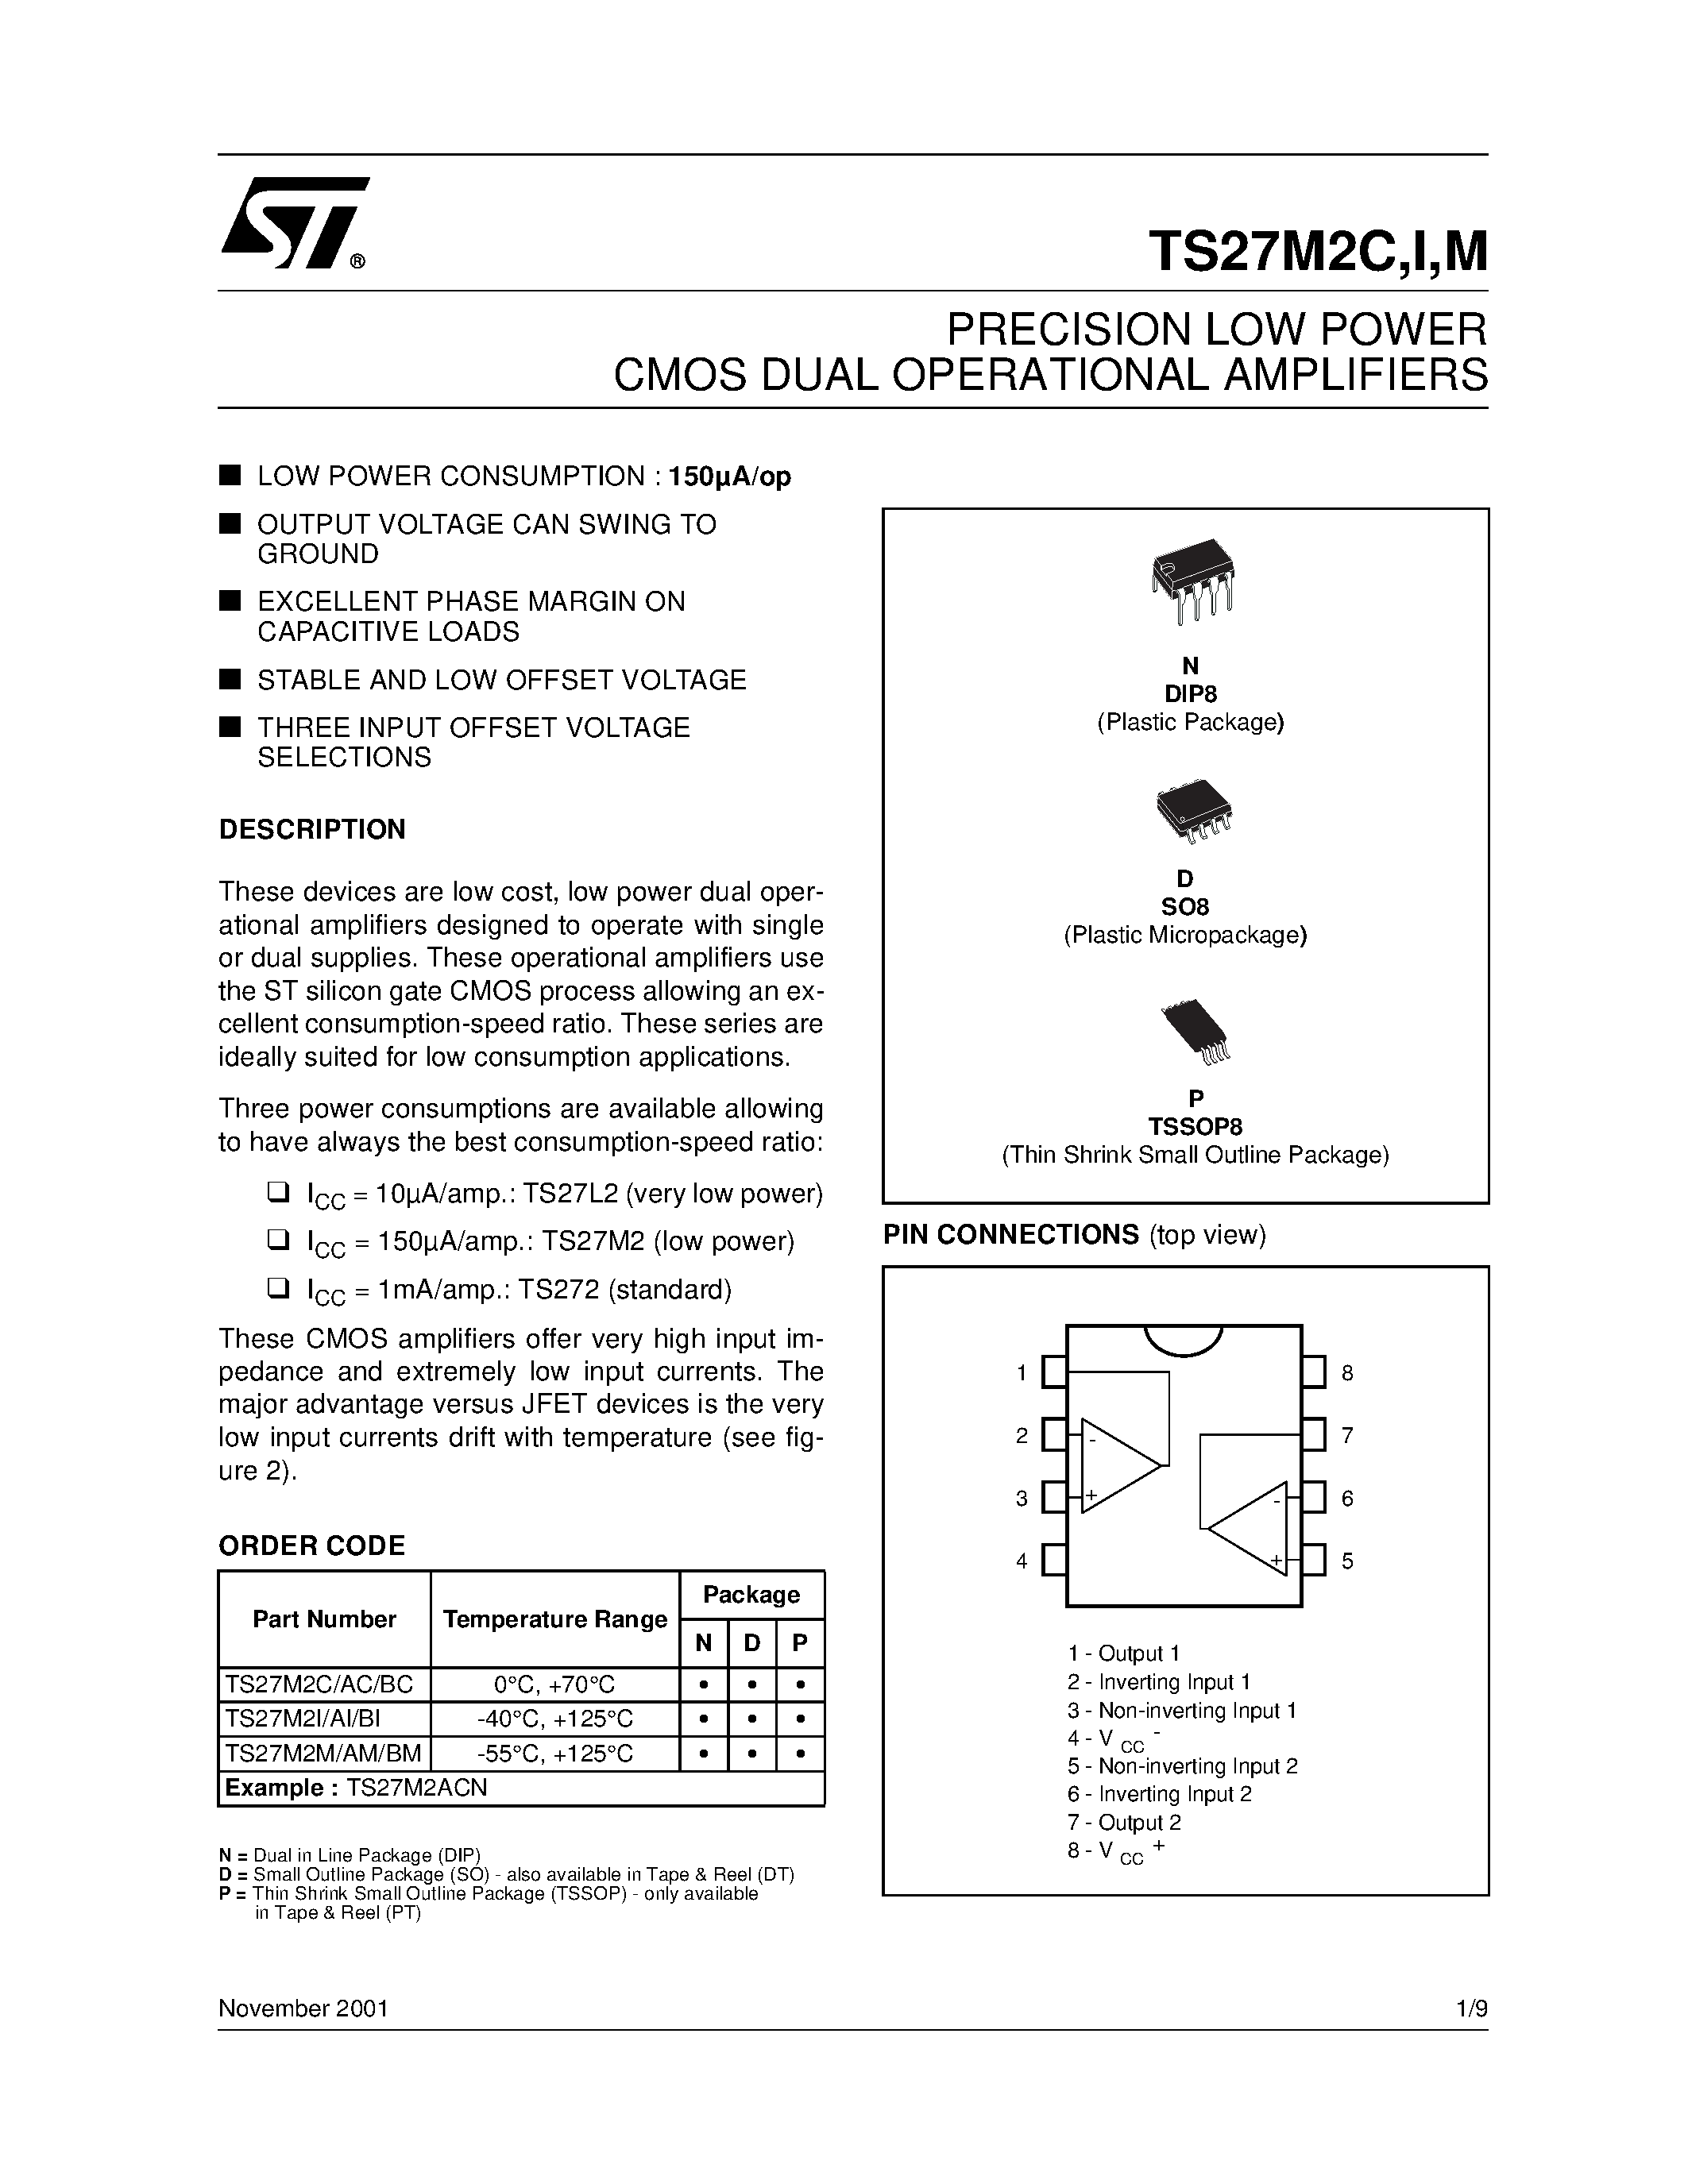 Datasheet TS27M2AC - PRECISION LOW POWER CMOS DUAL OPERATIONAL AMPLIFIERS page 1